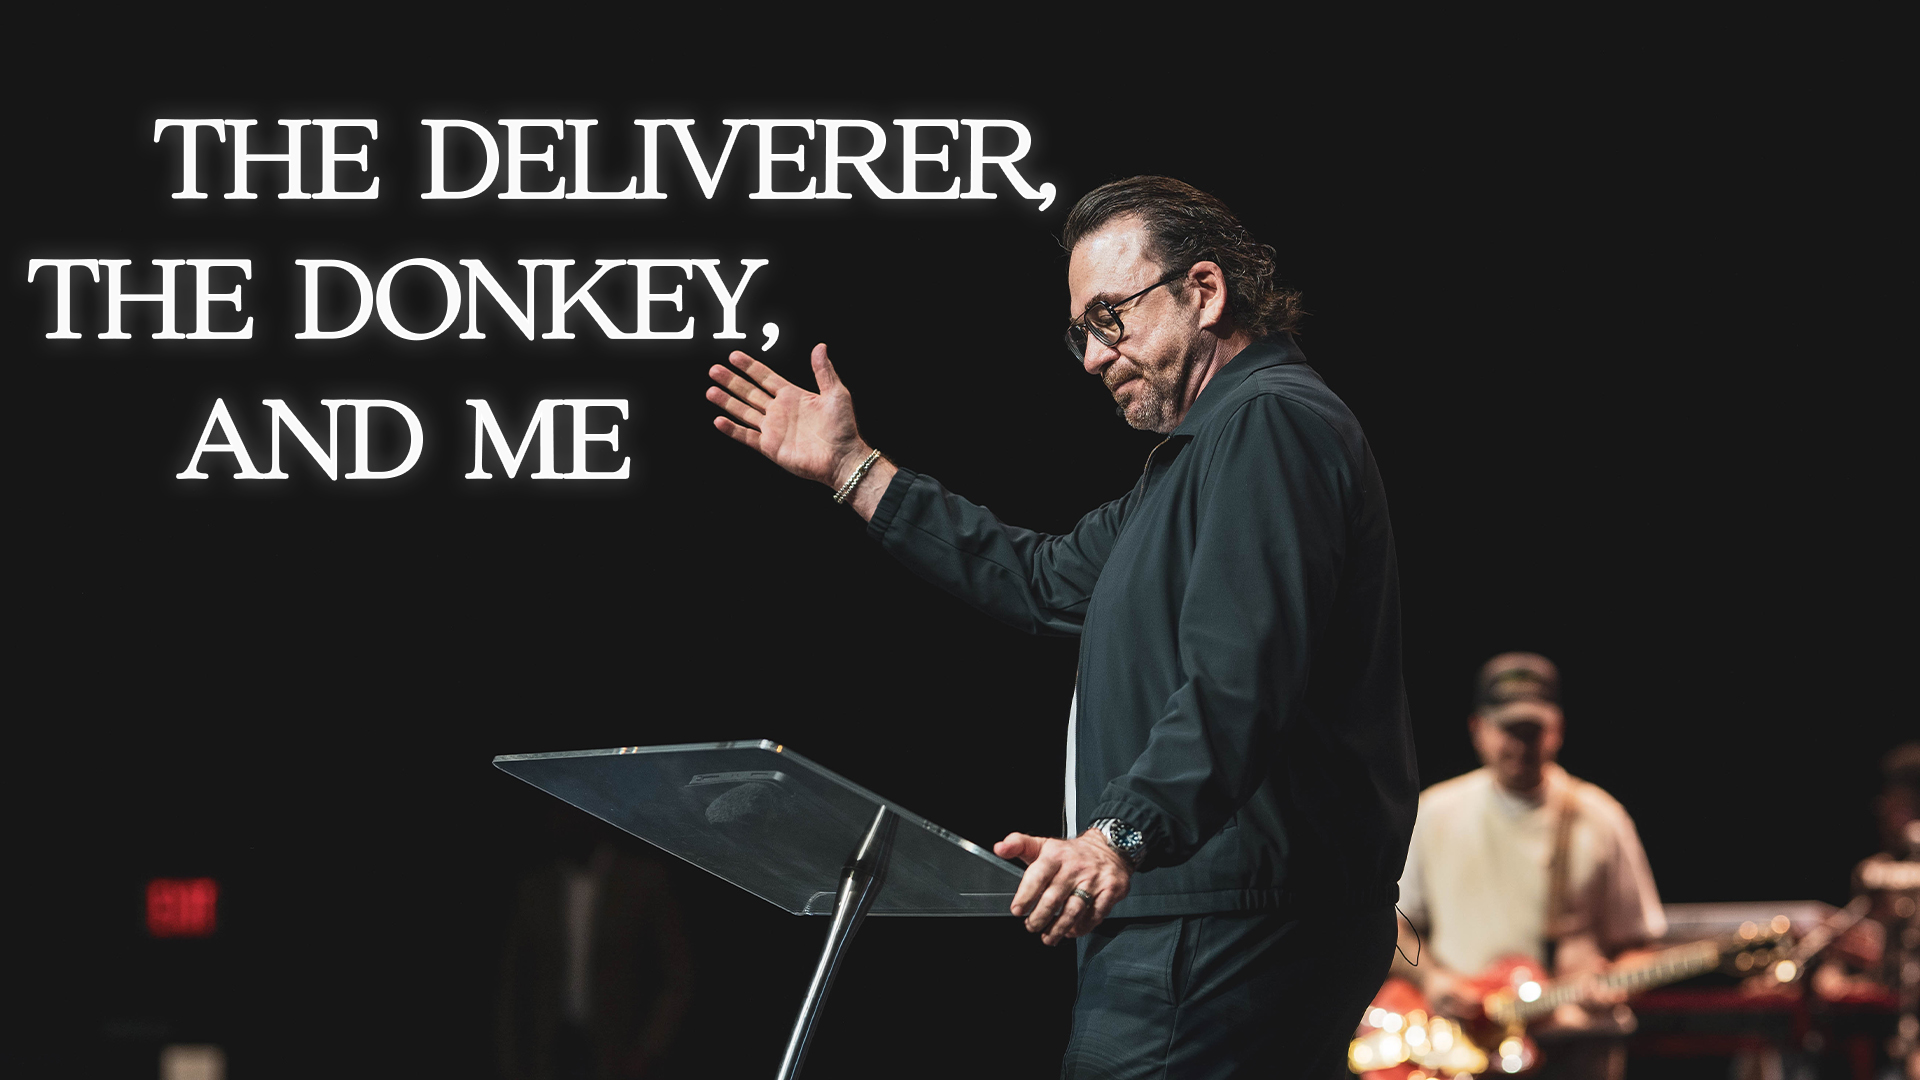 The Deliverer, The Donkey, And Me |Apostle Jim Raley